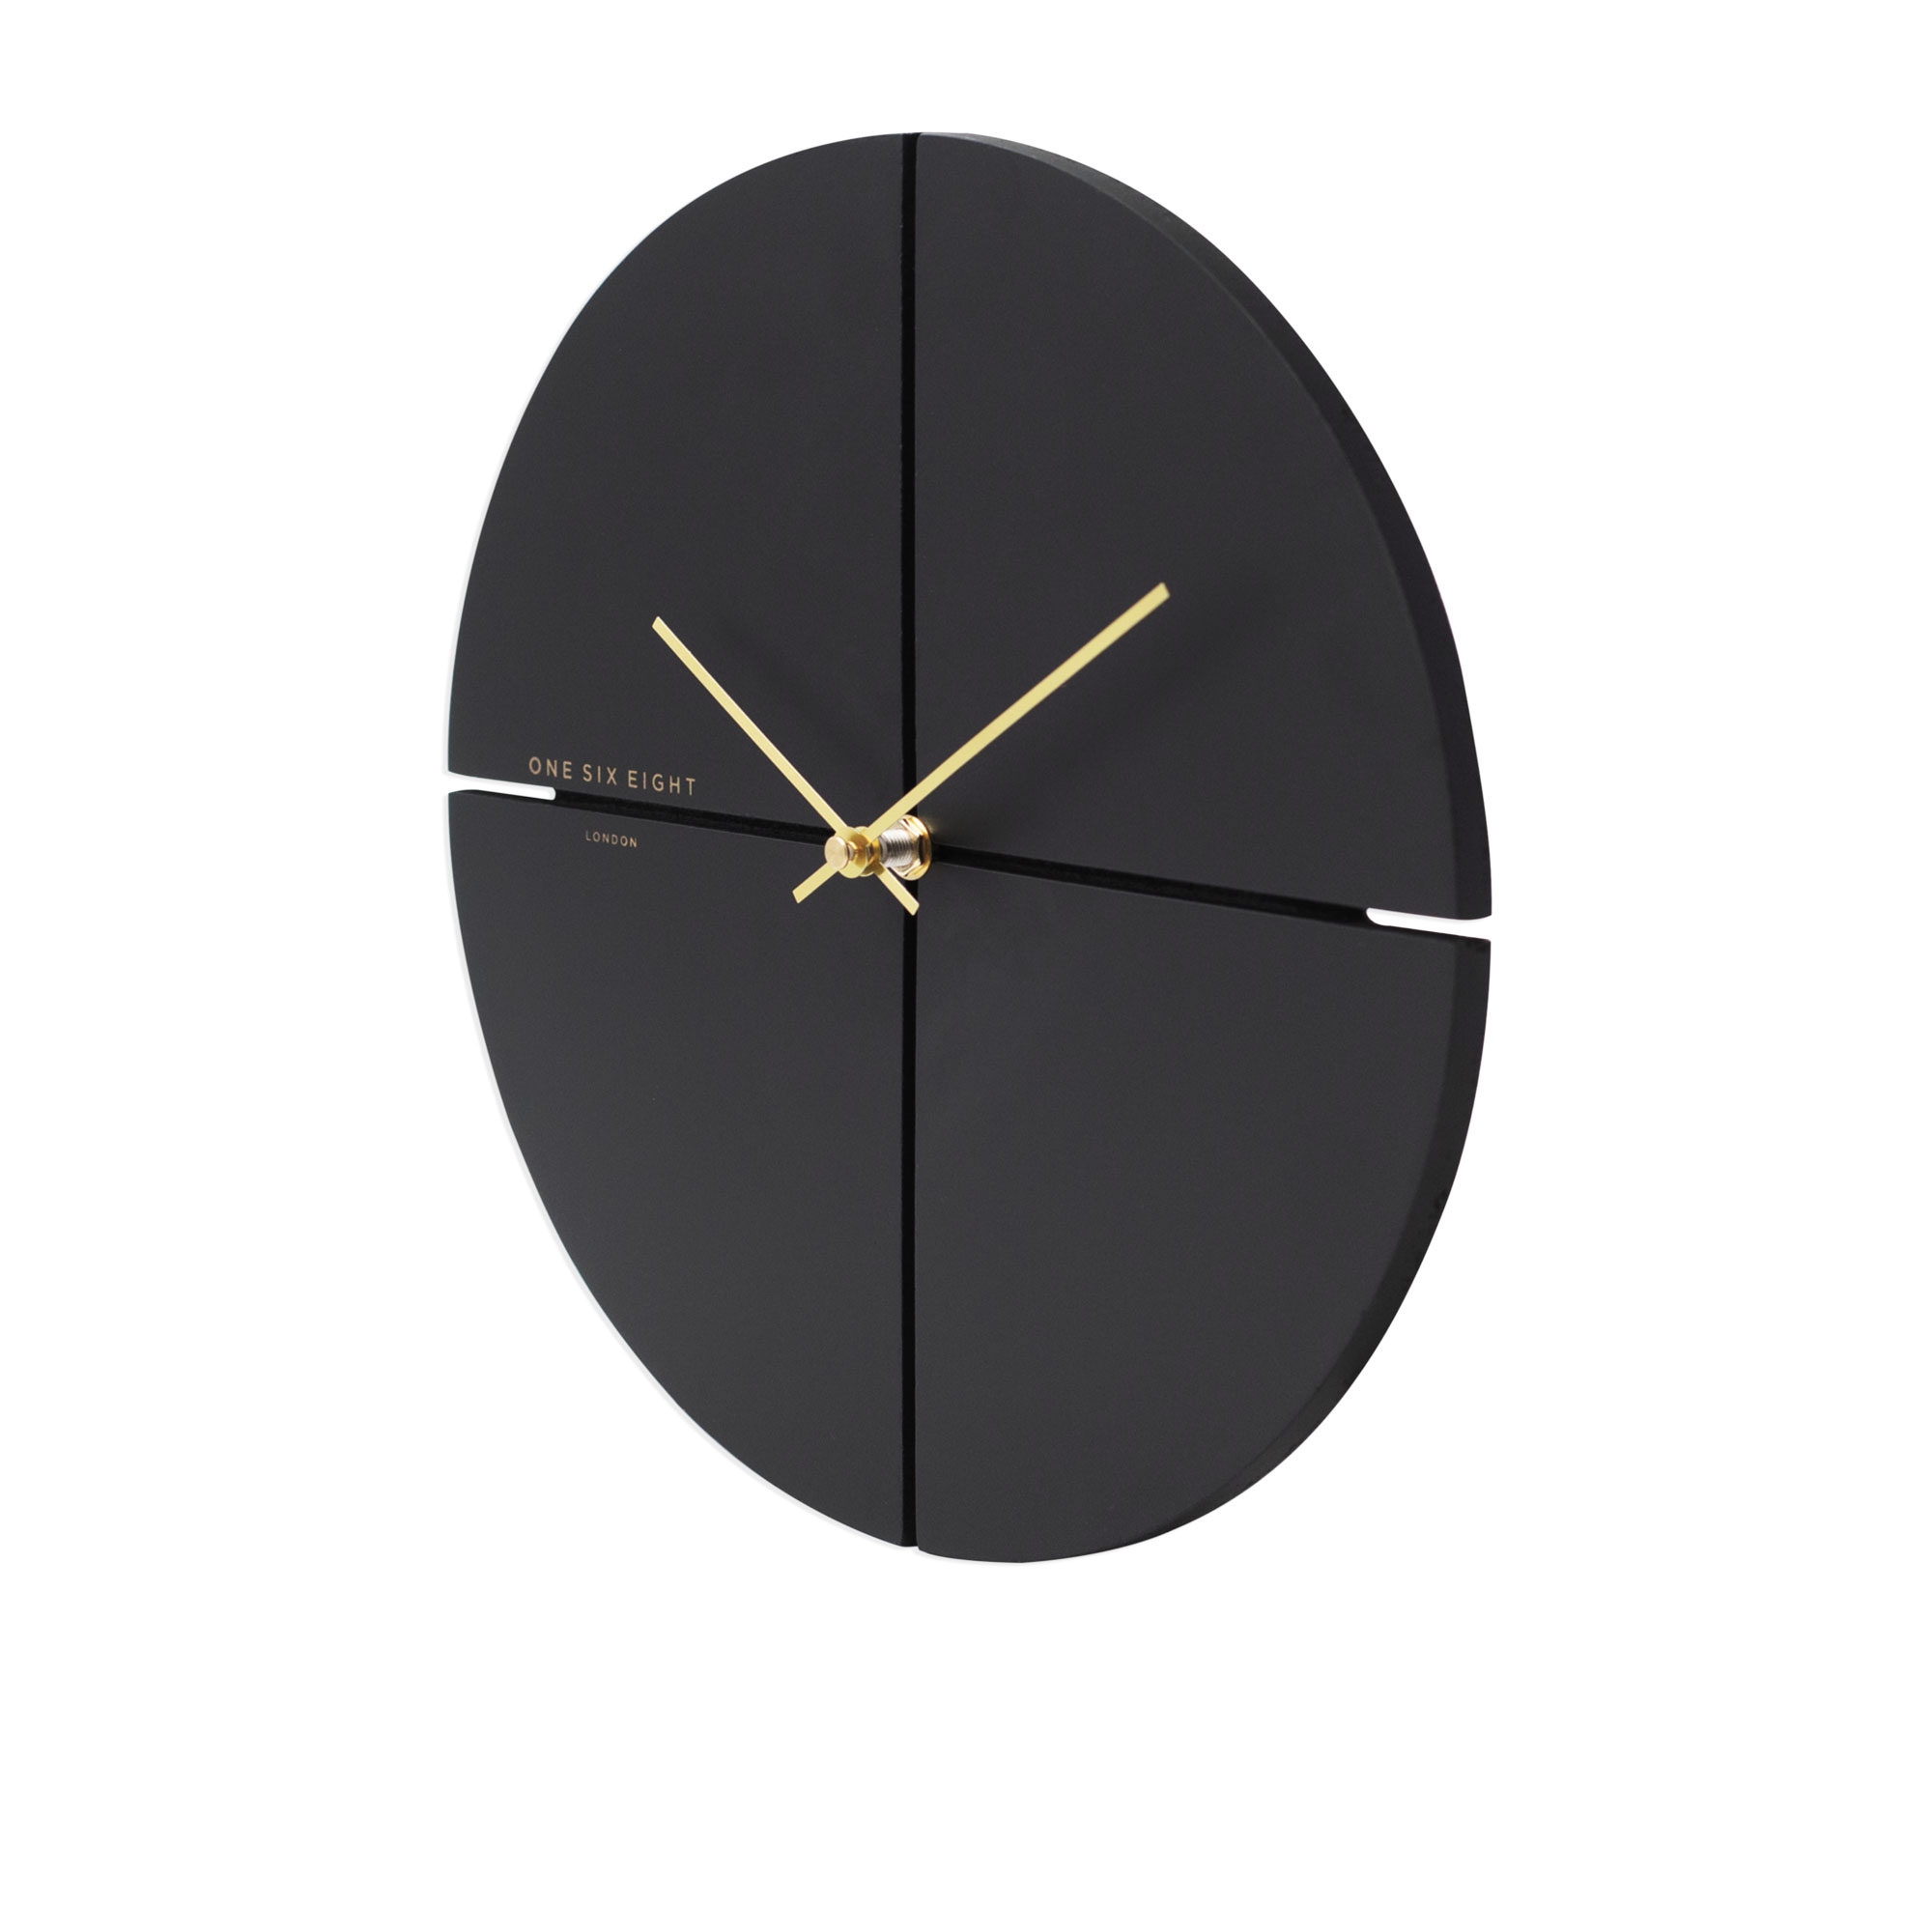 One Six Eight London Liam Silent Wall Clock 60cm Charcoal Grey Image 2